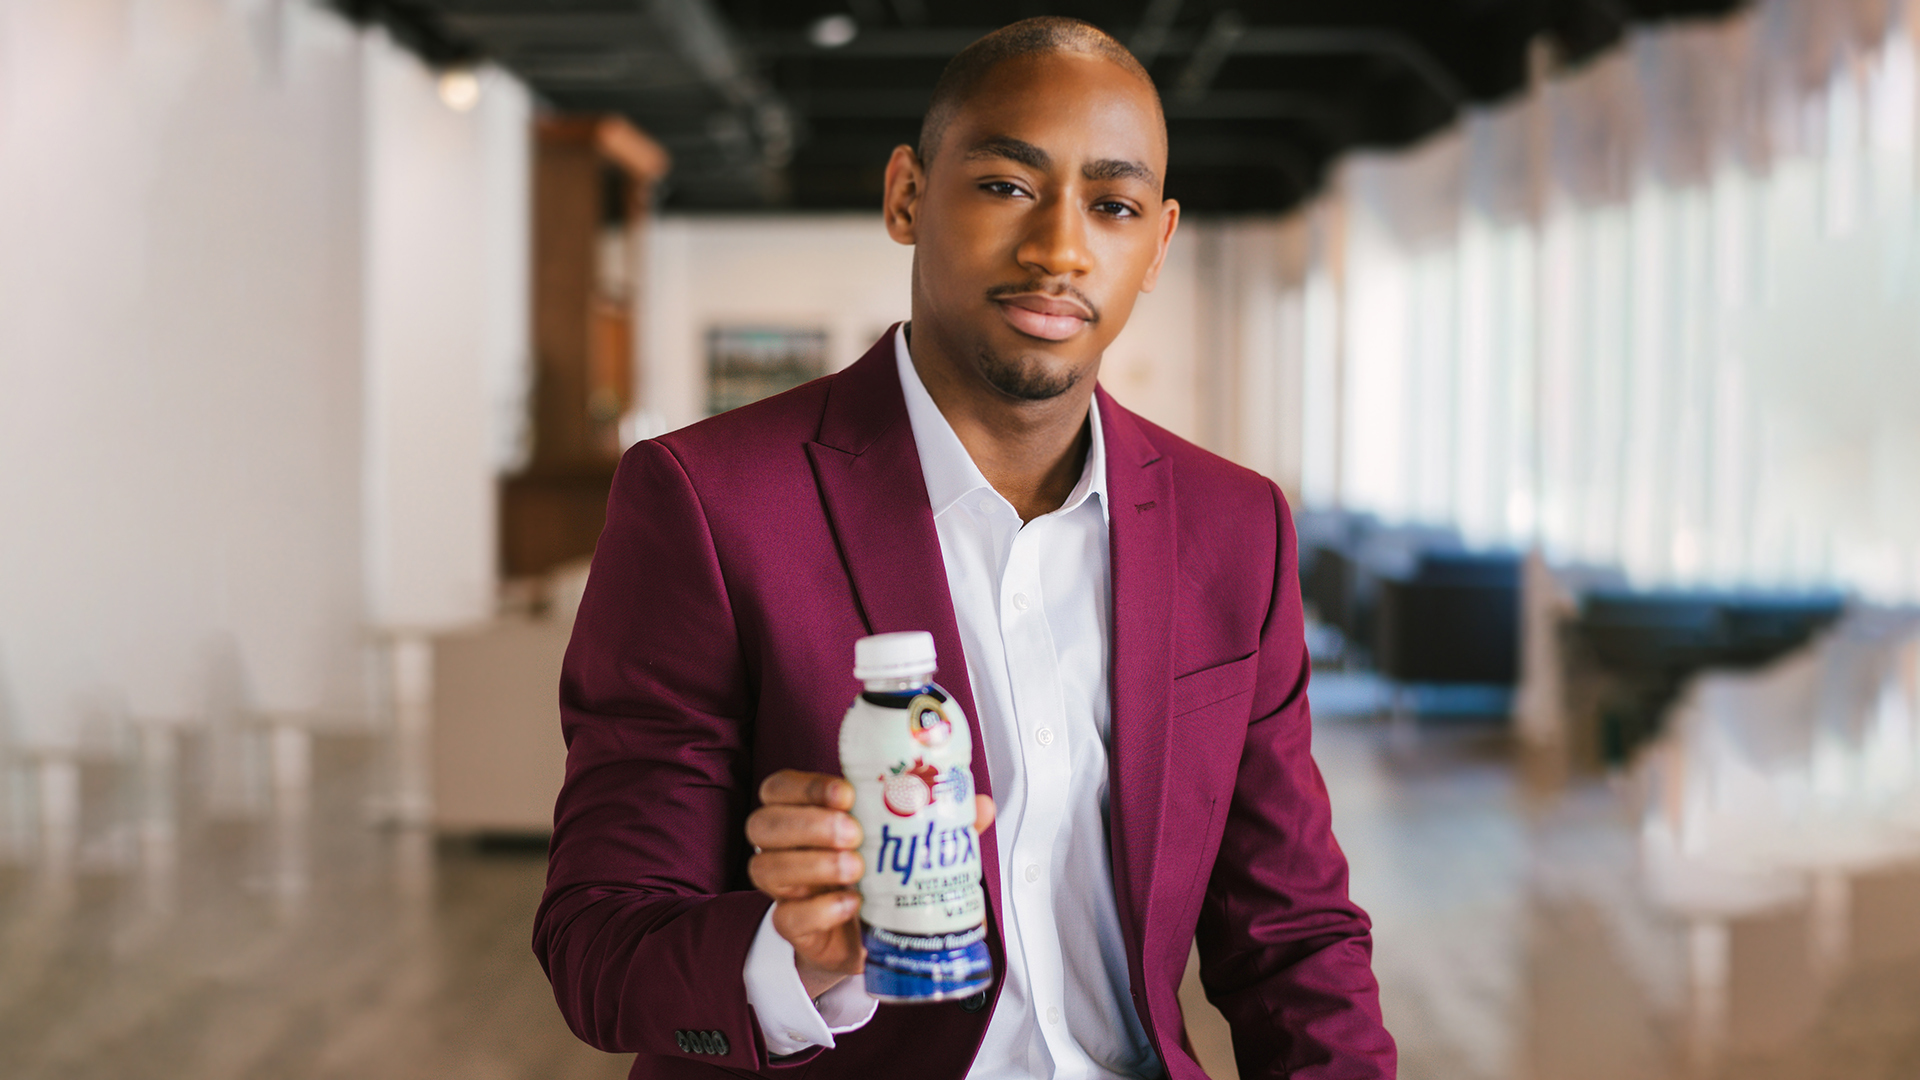 Hylux's Lamar Letts Becomes One Of The Youngest CEOs To Have His Products Sold On Walmart.com